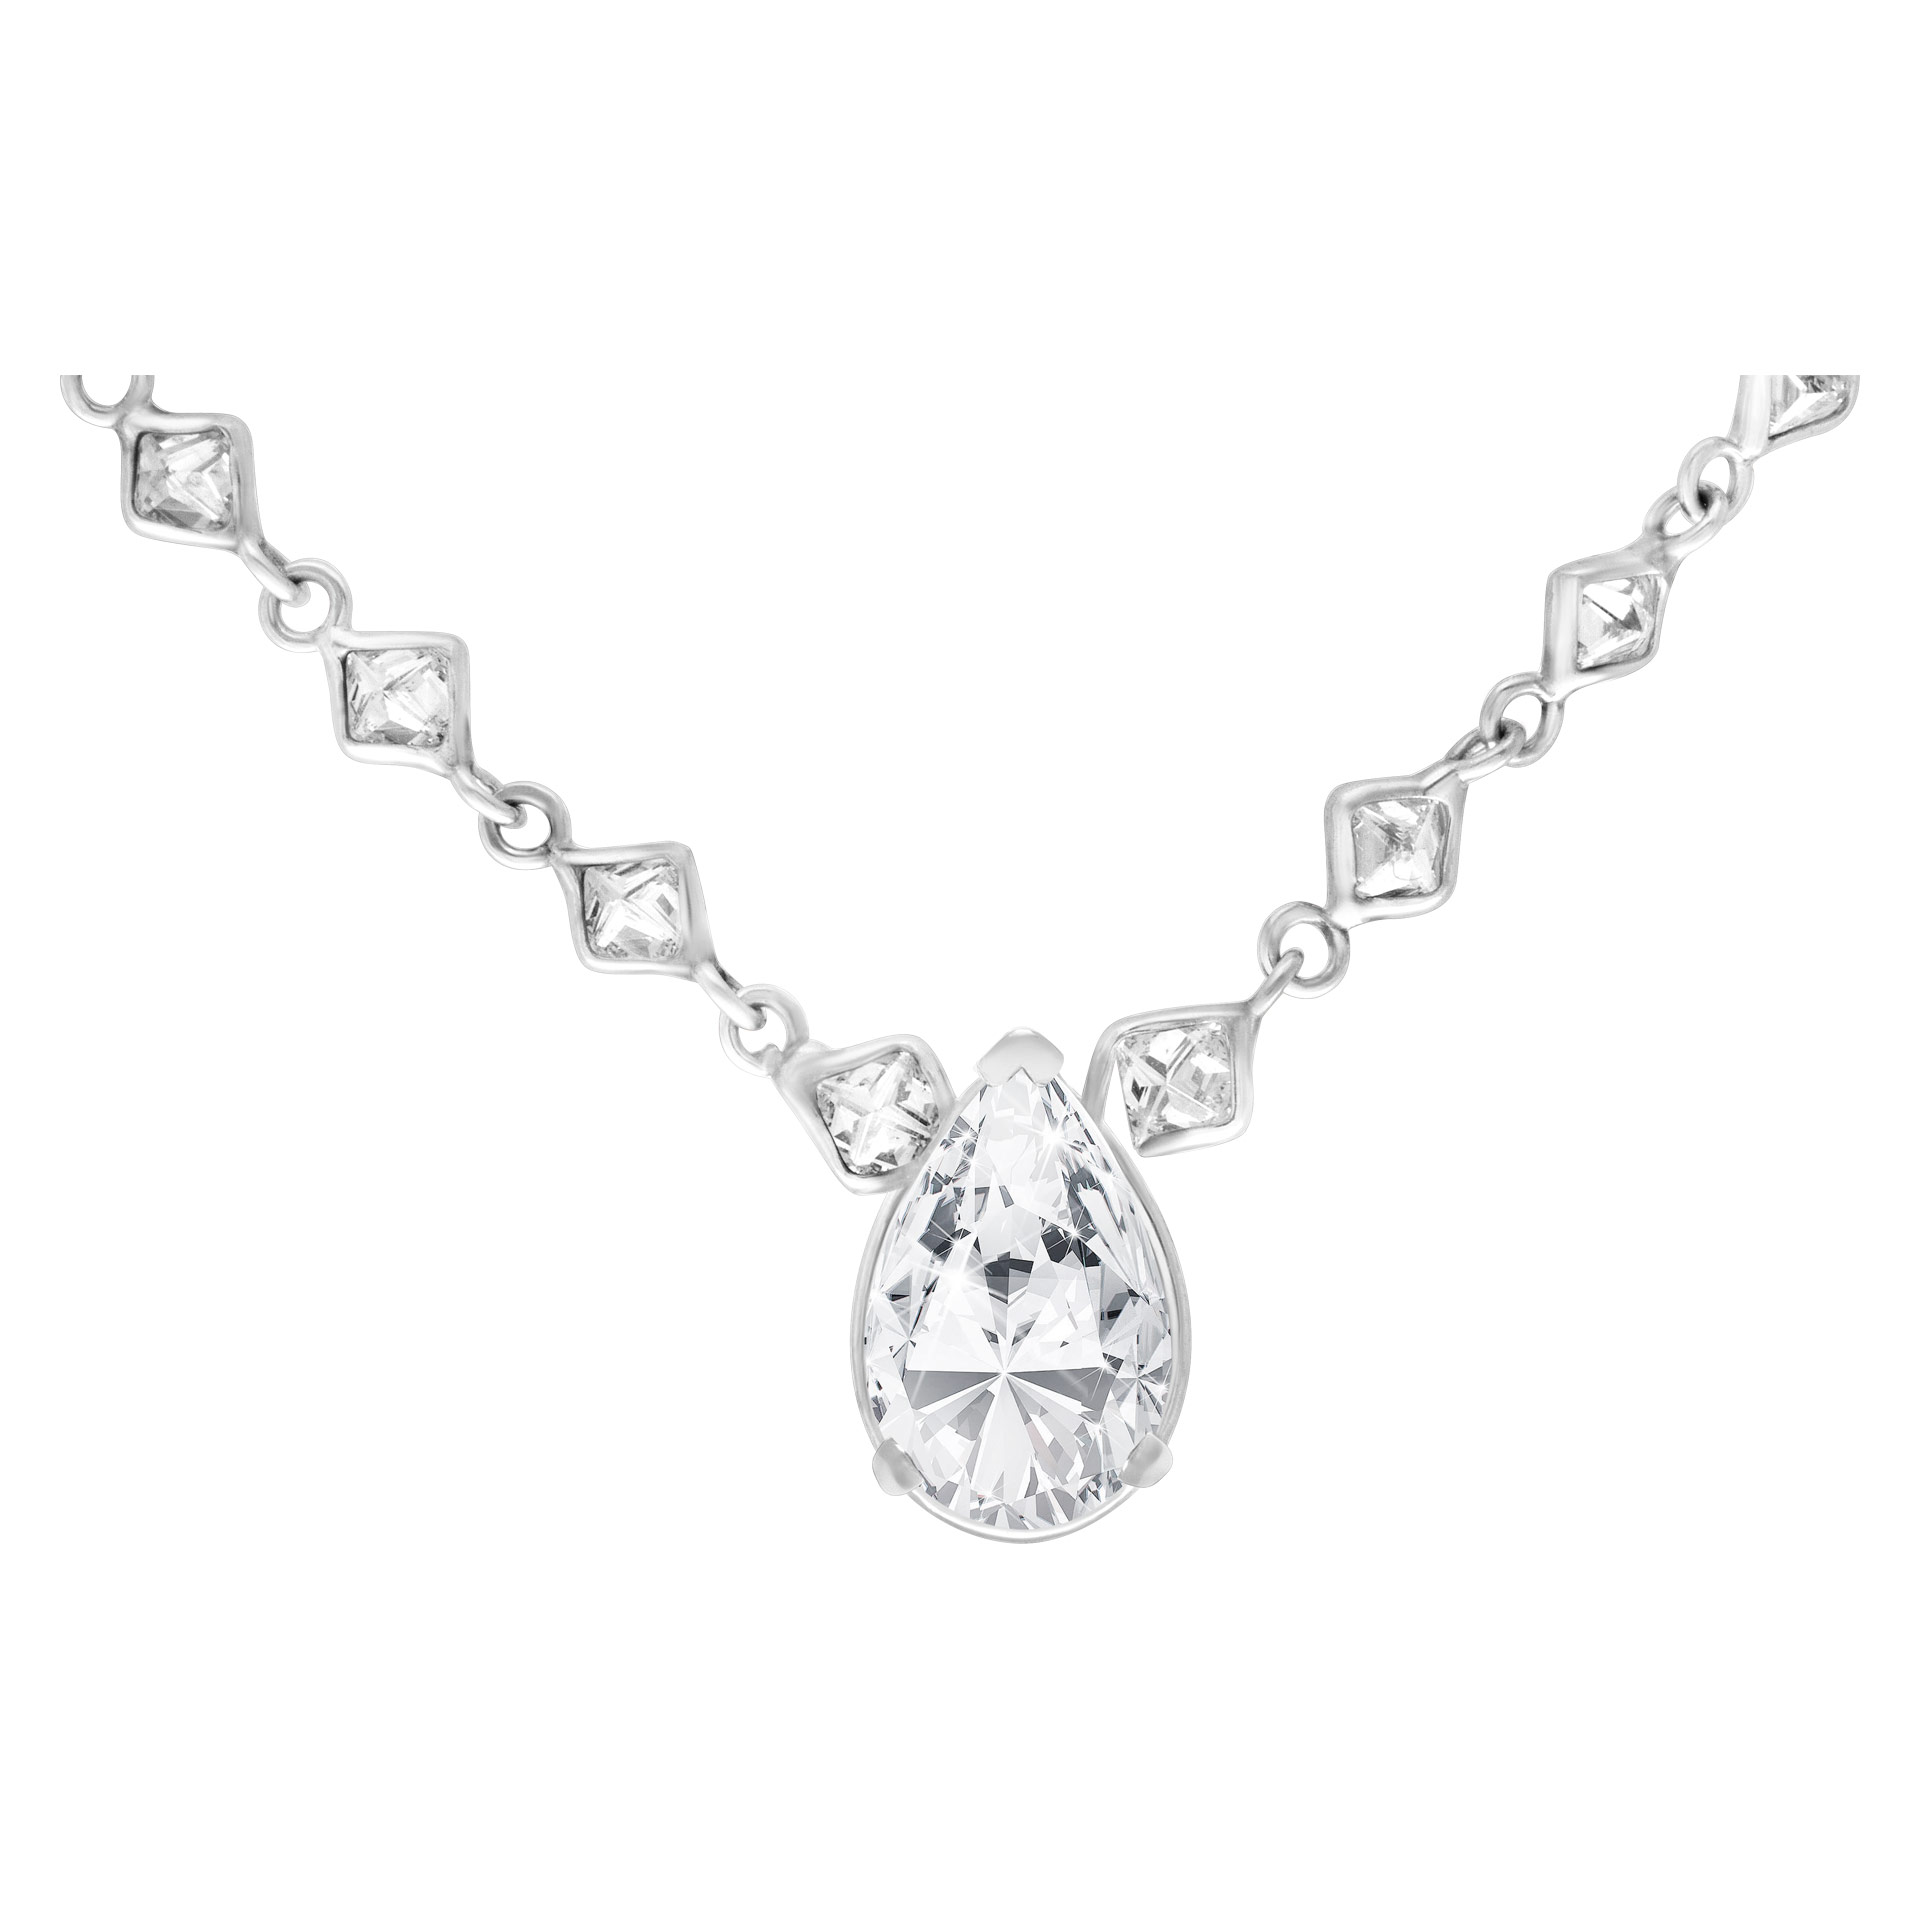 GIA Certified pear shaped 3.84cts on a necklace with 5cts princess cut diamonds by-the-inch image 1